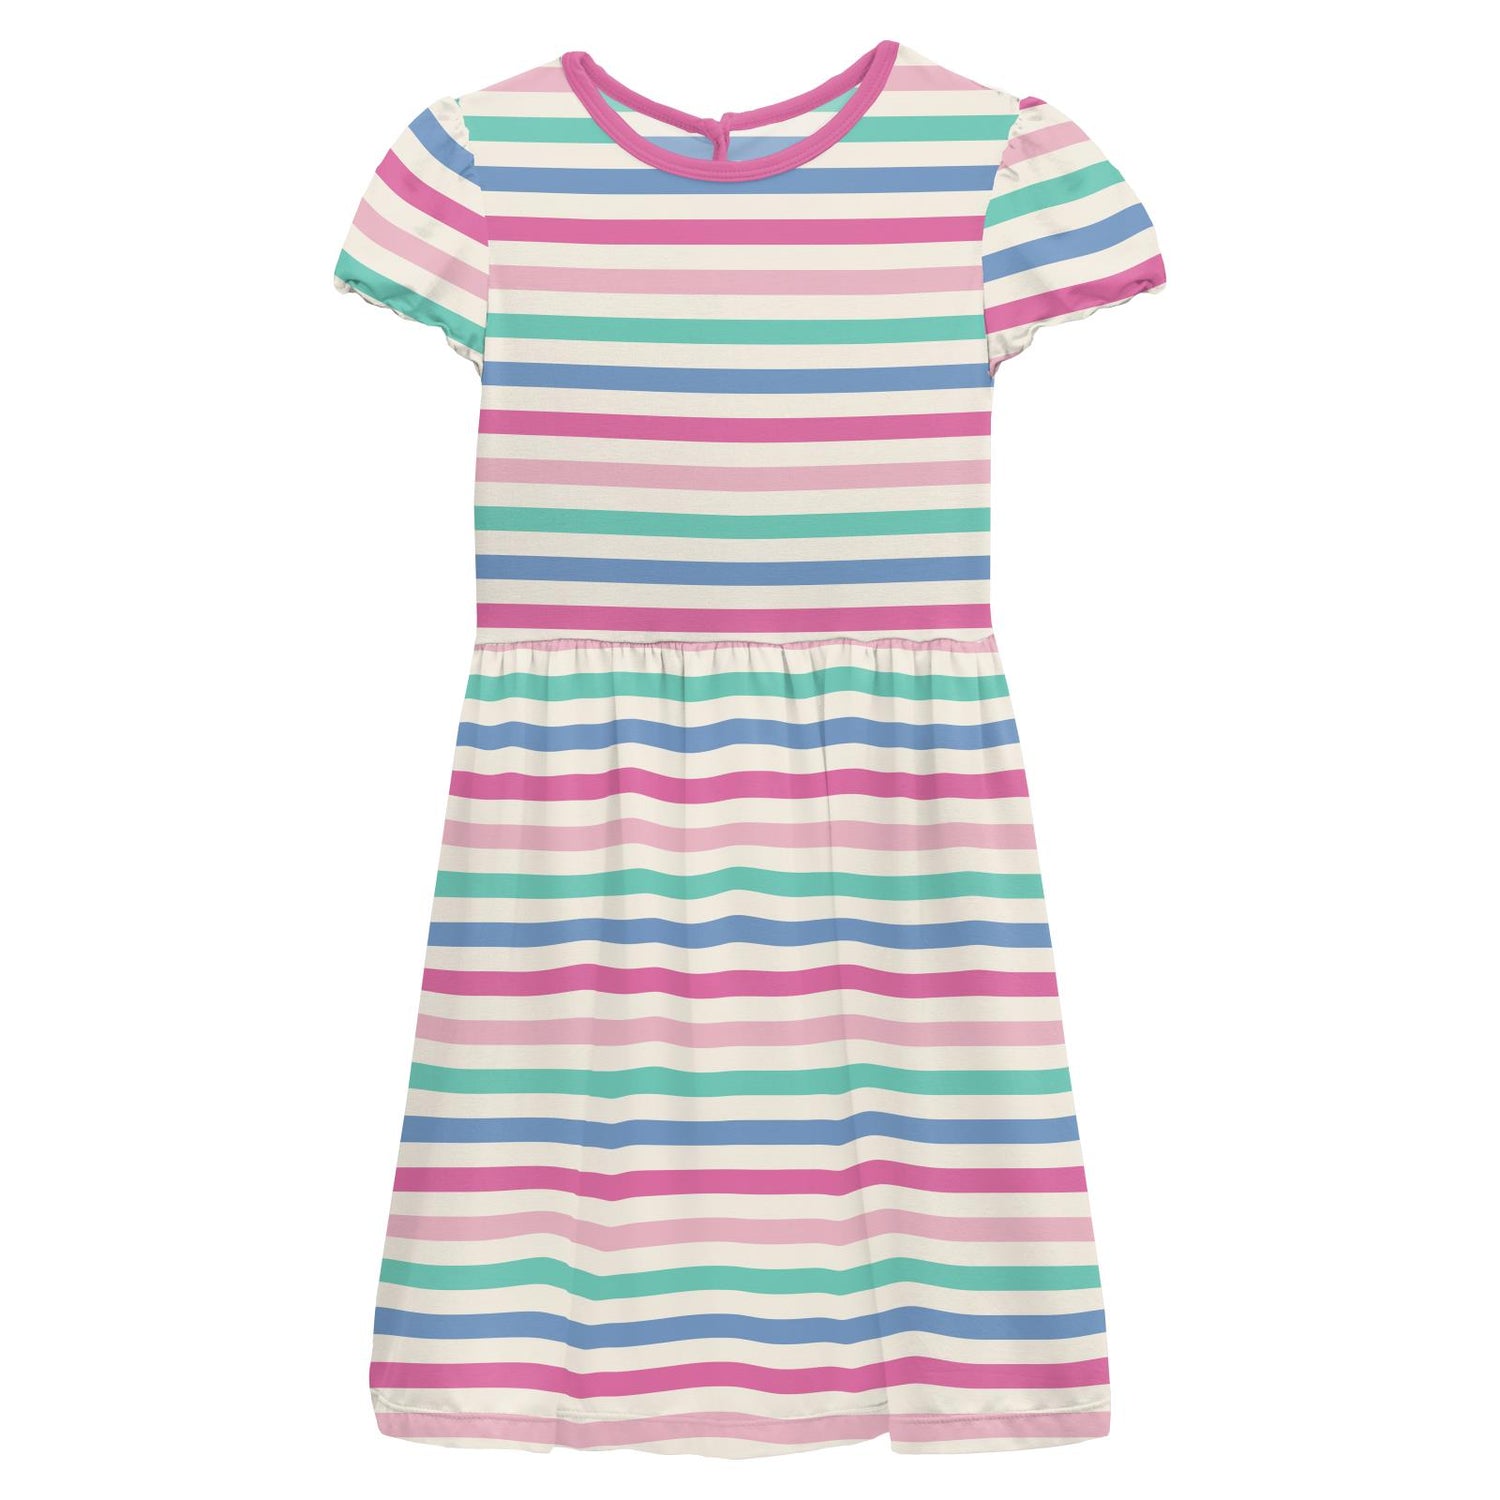 Print Flutter Sleeve Twirl Dress with Pockets in Skip To My Lou Stripe